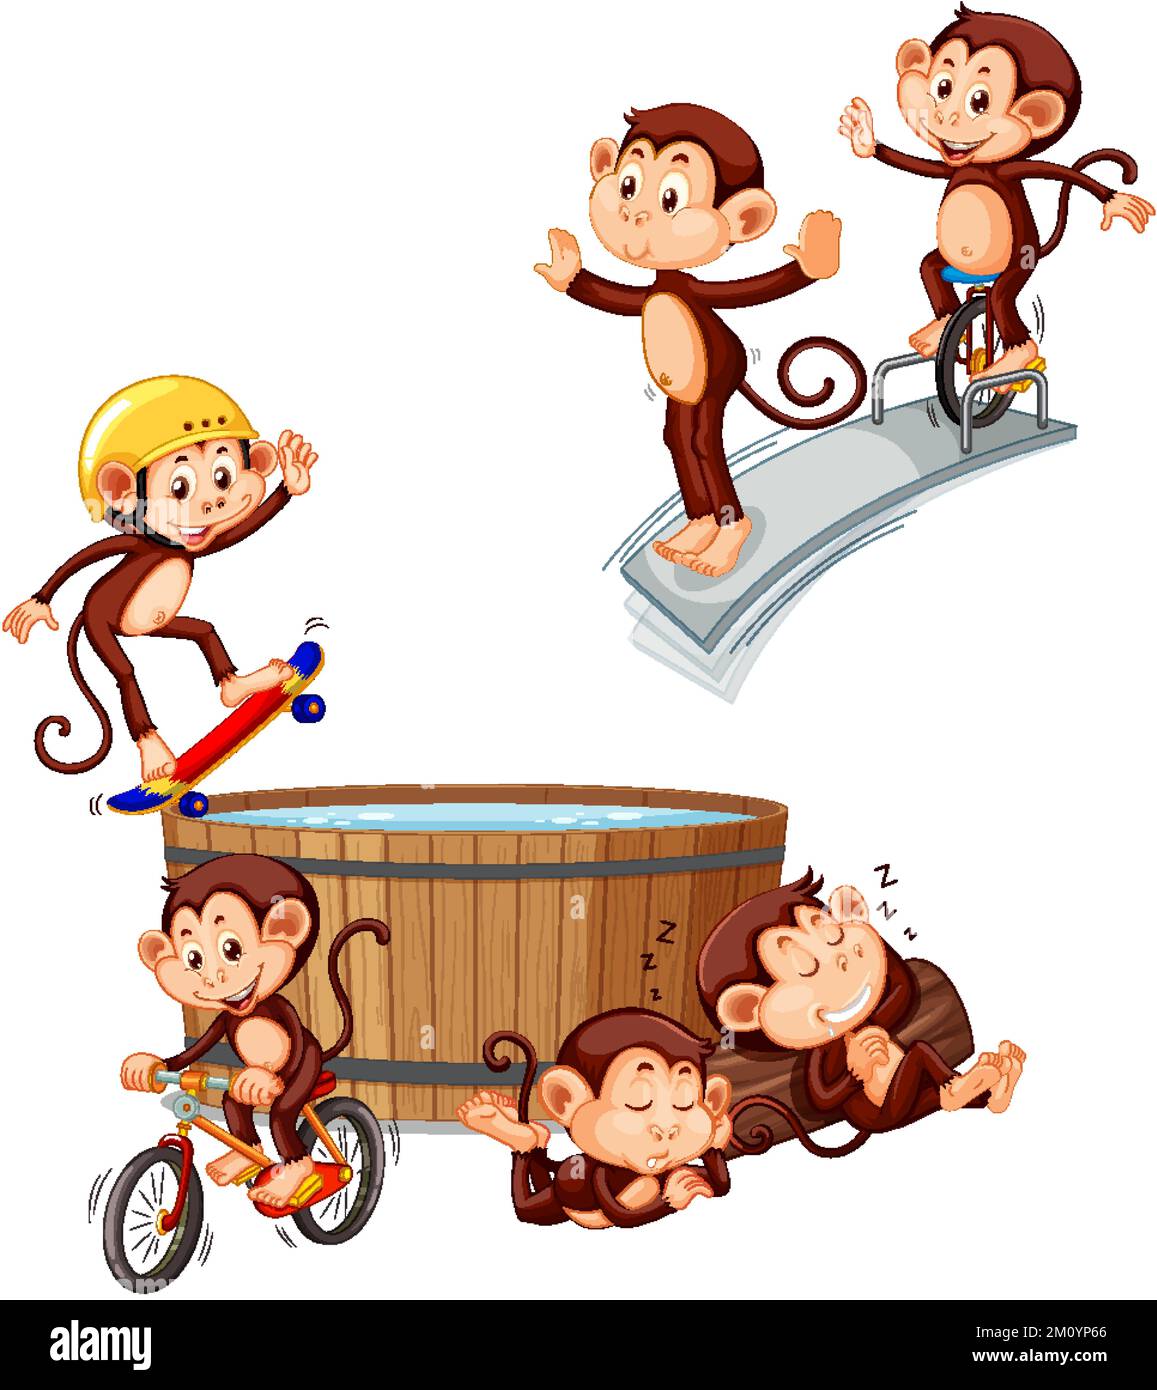 Monkey with different action illustration Stock Vector